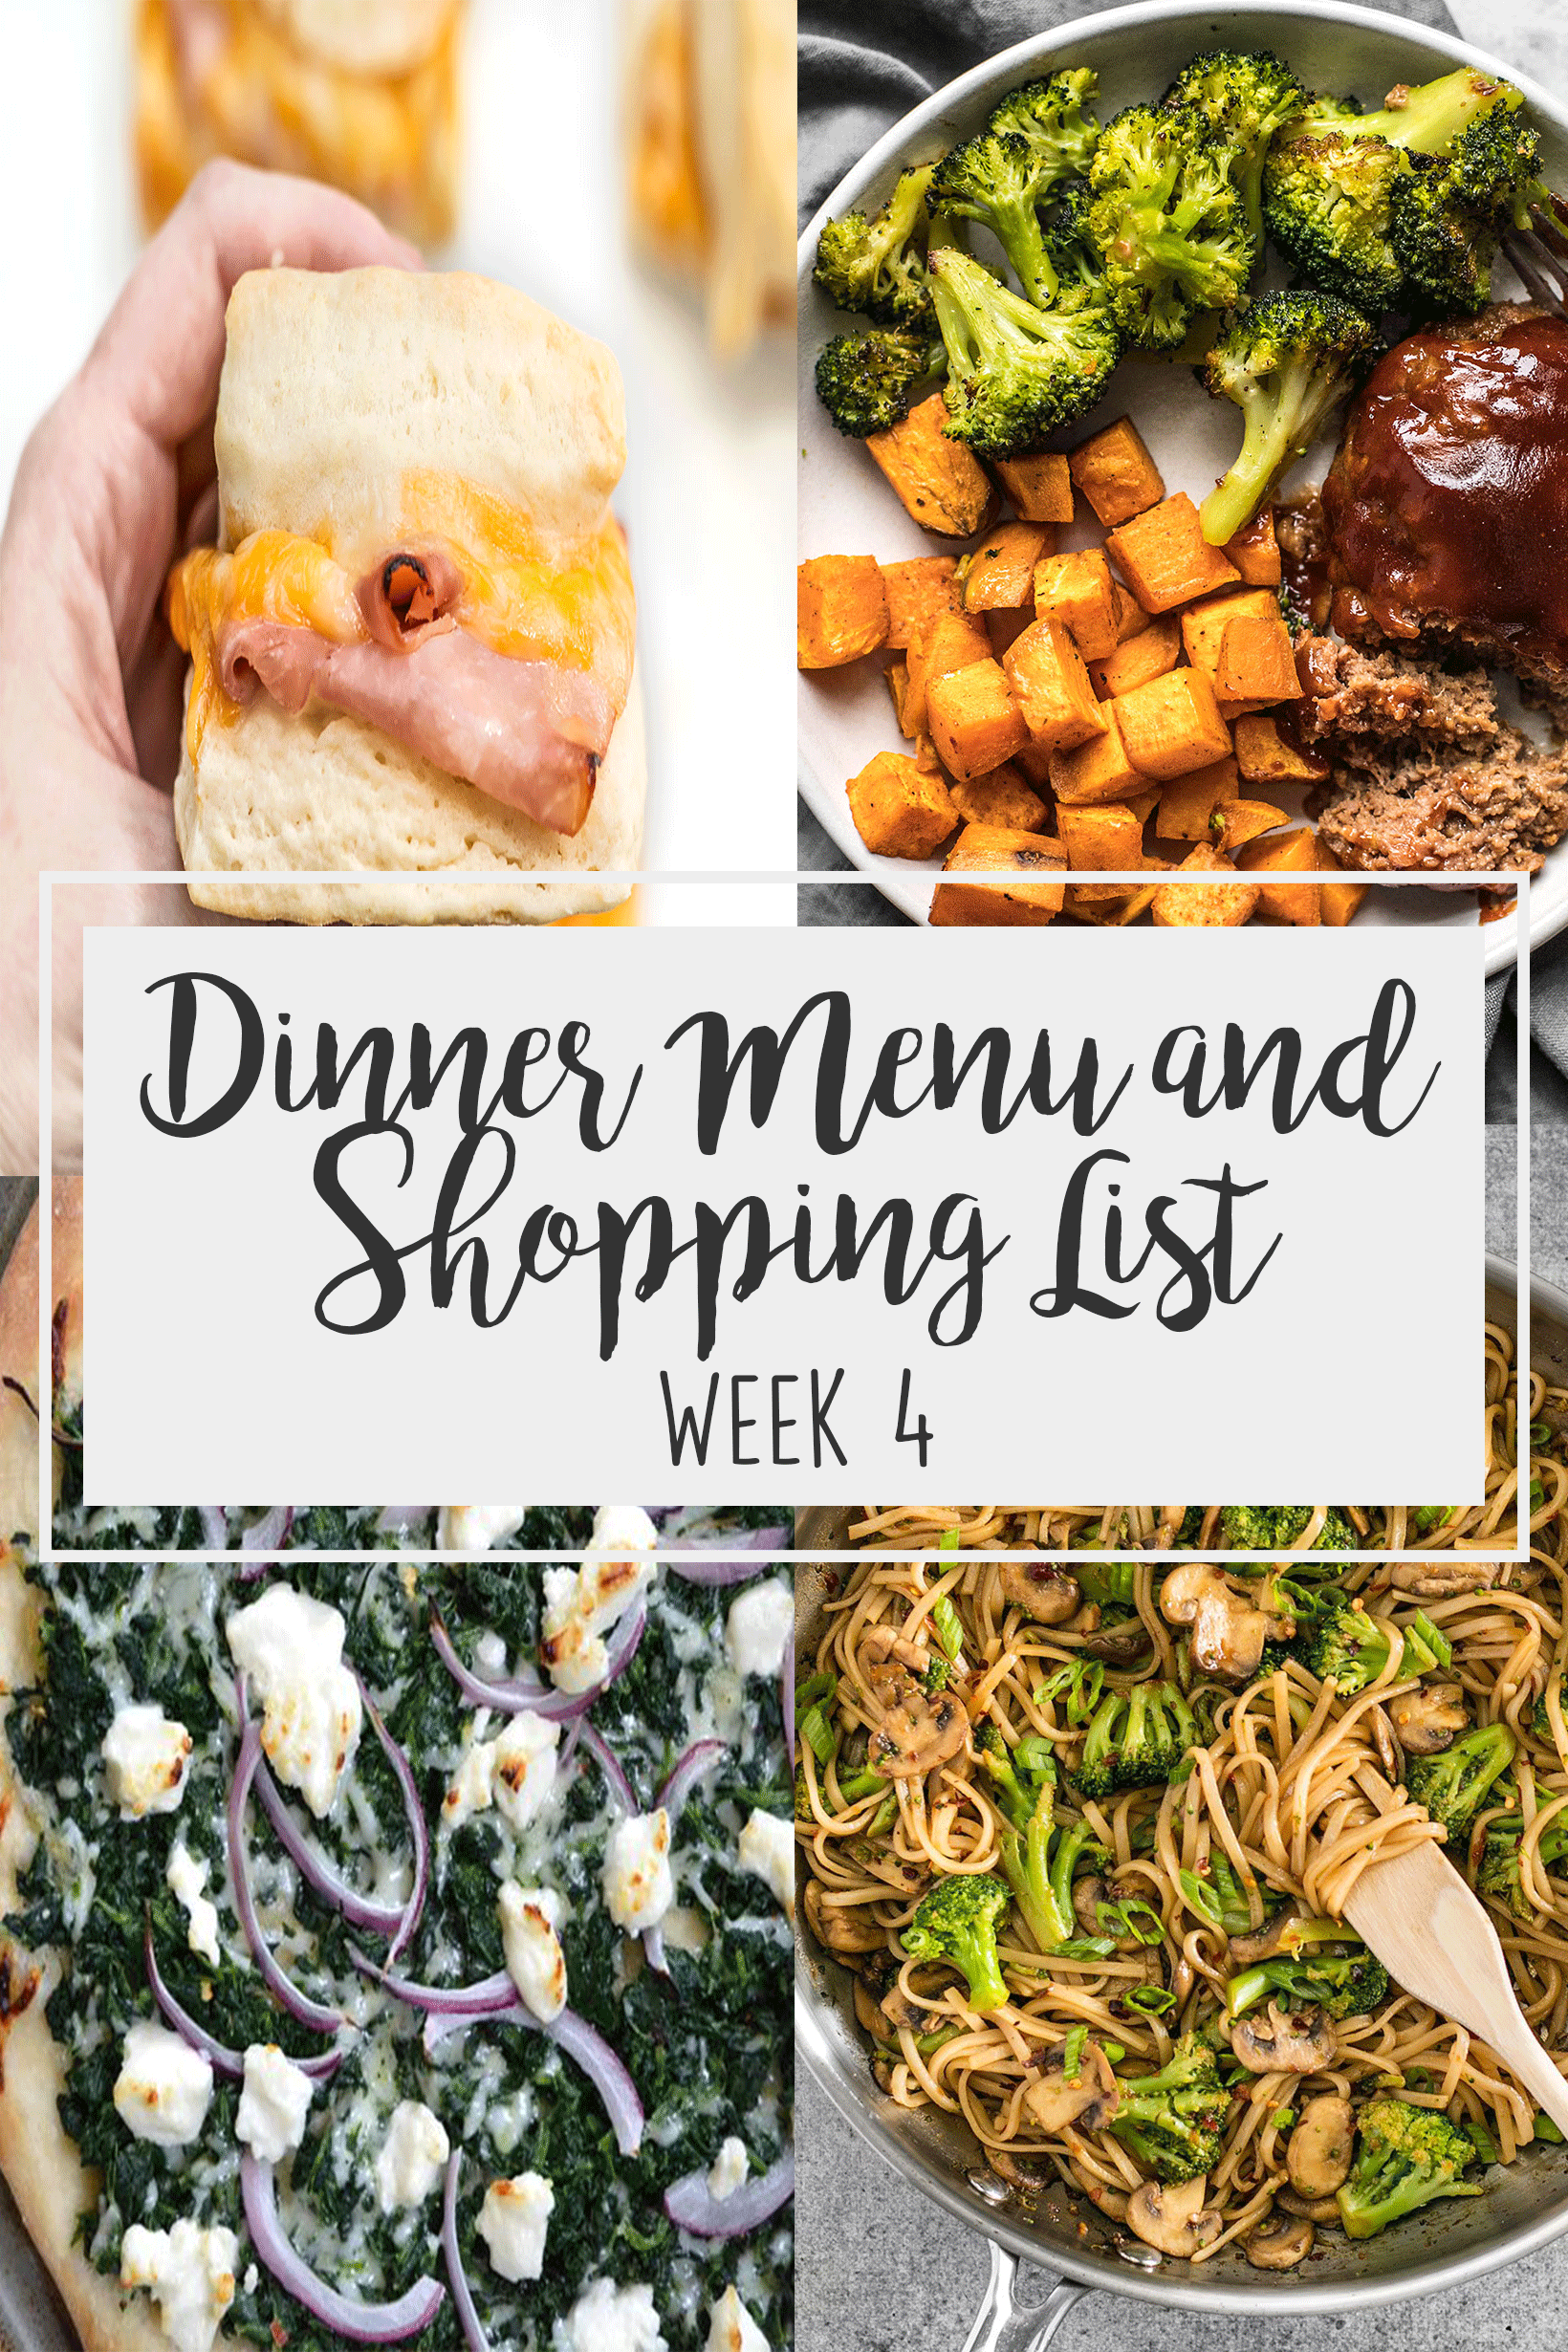 Weekly Shopping list and Menu